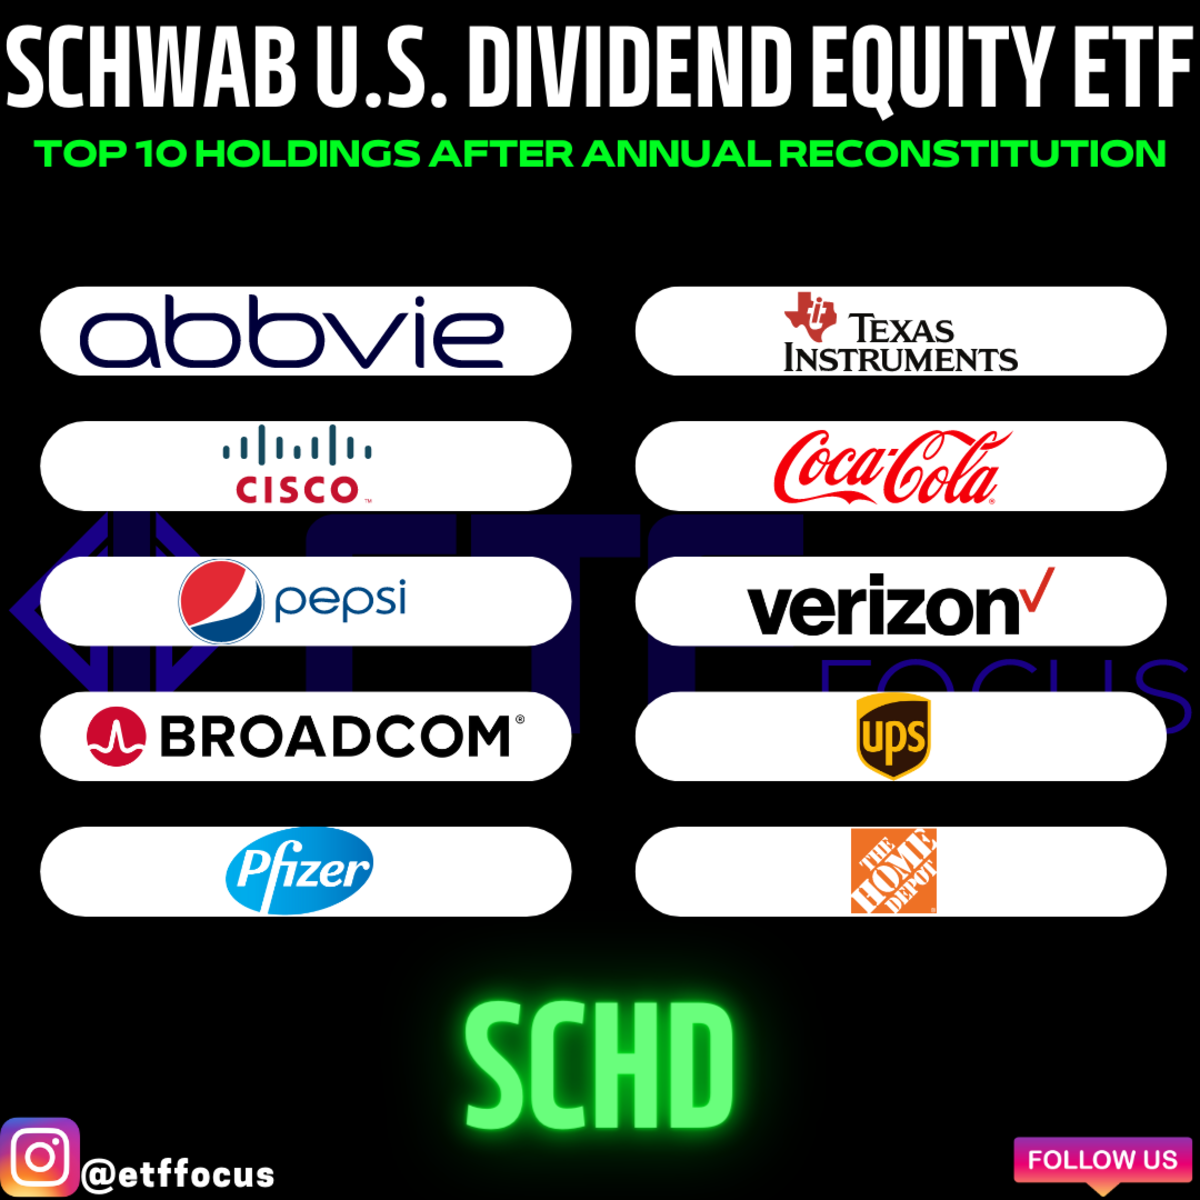 Schwab US Dividend Equity ETF (SCHD) New Top 10 Holdings ABBV, PFE, UPS In; MRK, LMT, IBM Out